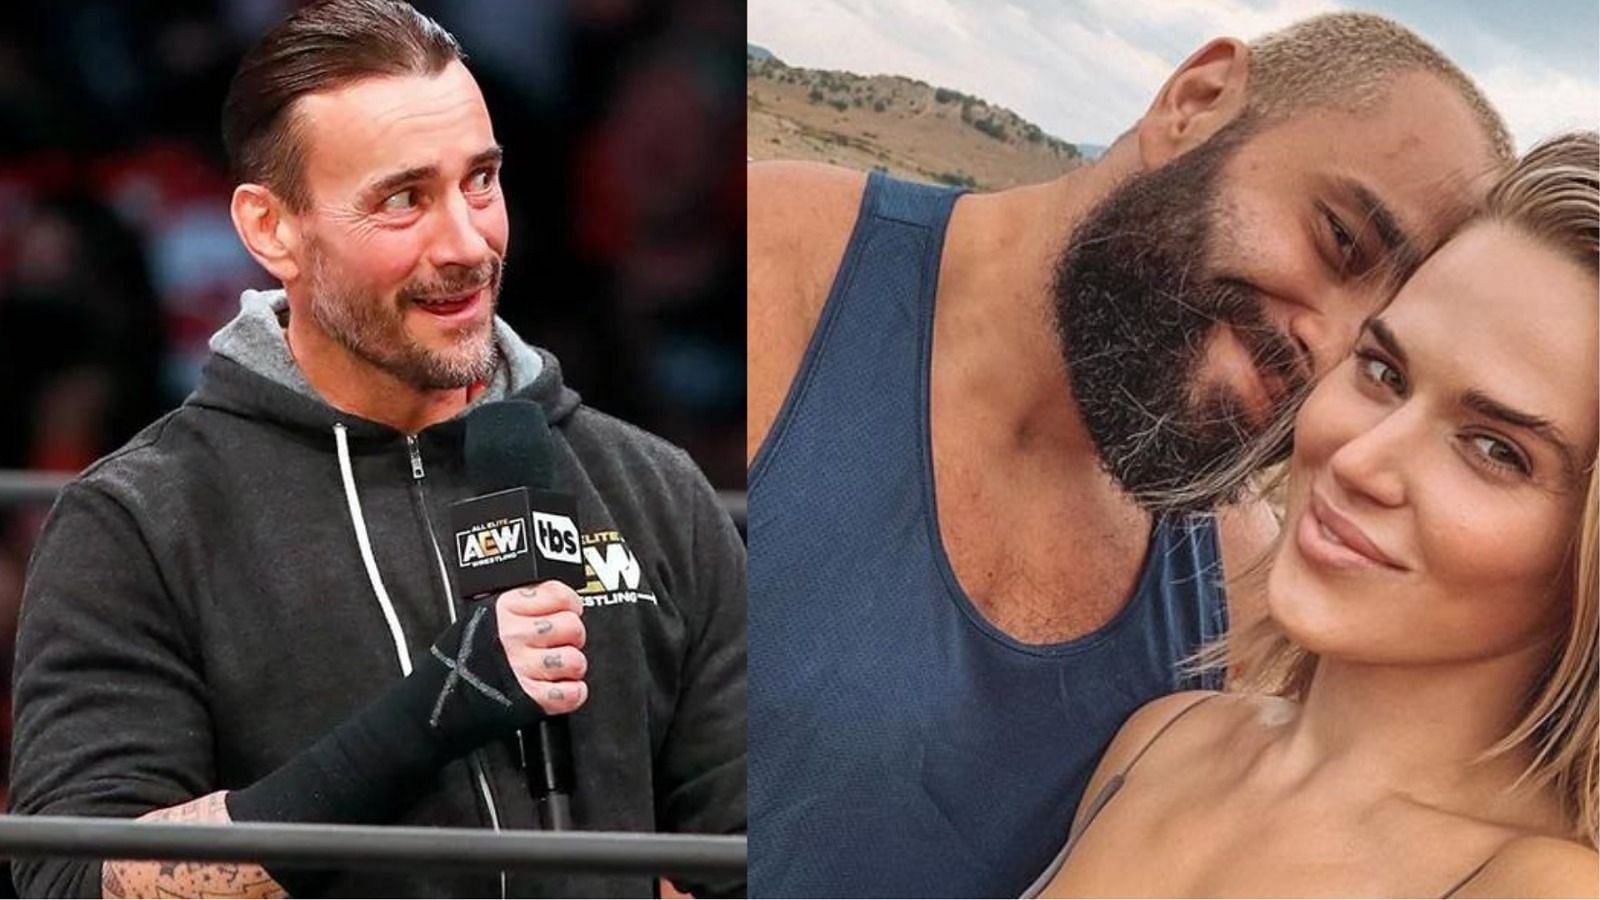 AEW News Roundup: CM Punk wants top name to be fired, ex-WWE star teases finishing romantic storyline with Miro